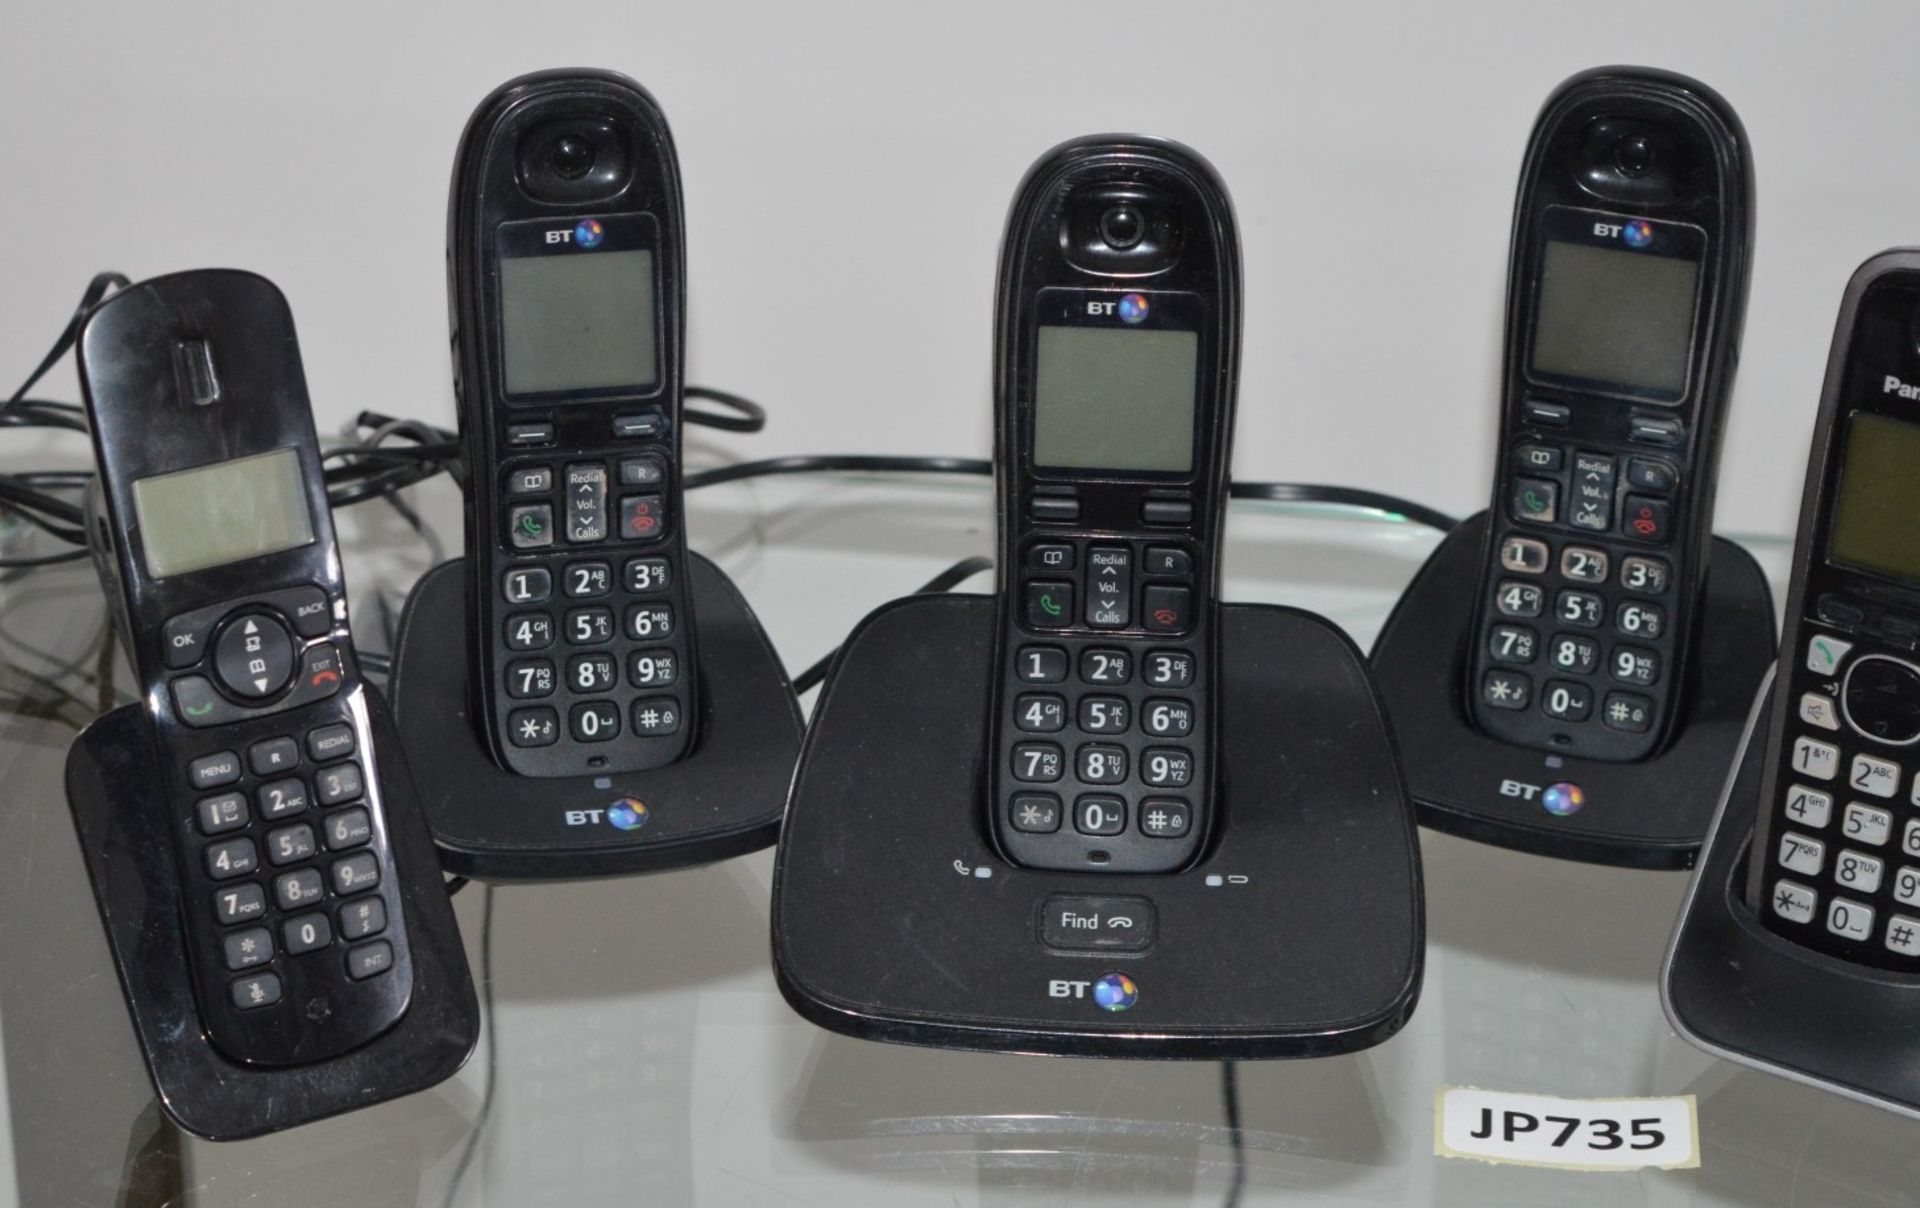 6 x Cordless Phone Handsets - Includes BT, Binatone and Panasonic Models - CL285 - Ref JP735 - - Image 2 of 4